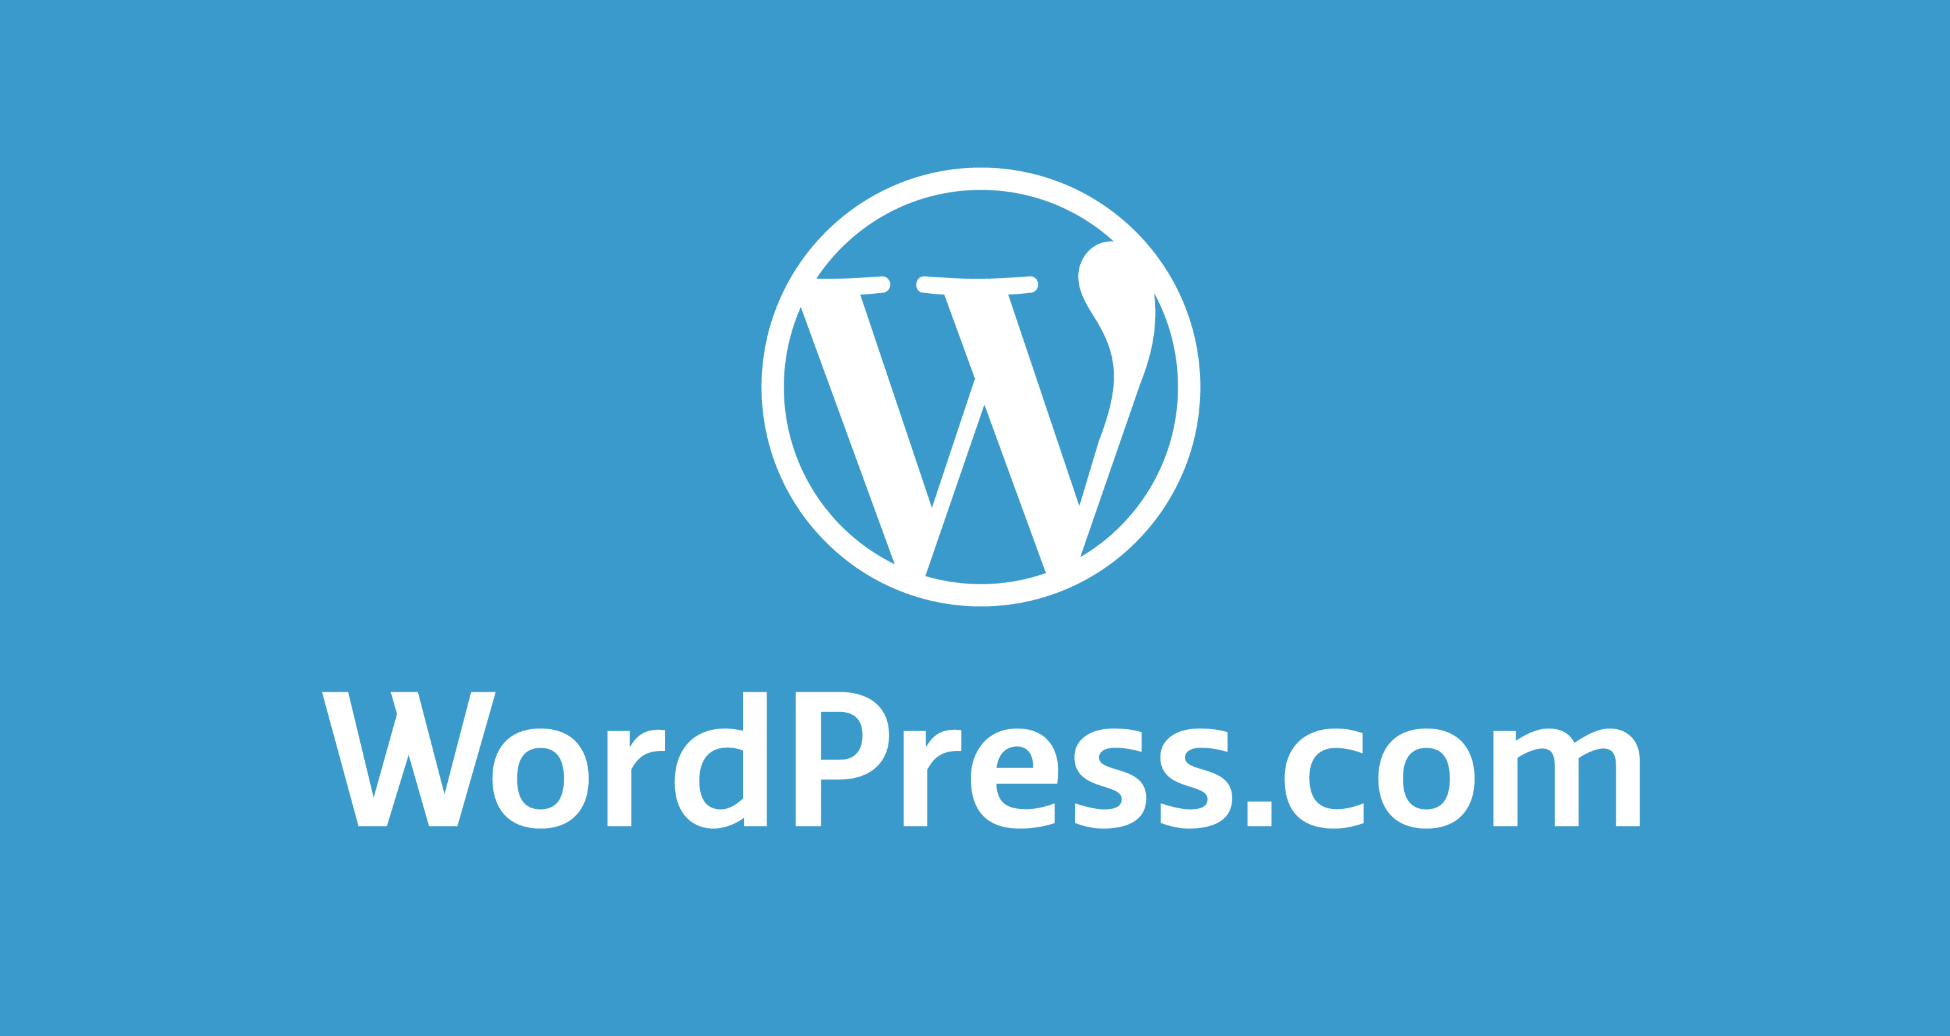 WordPress.com Ends Recent Pricing Experiment, Reverts to Previous Model